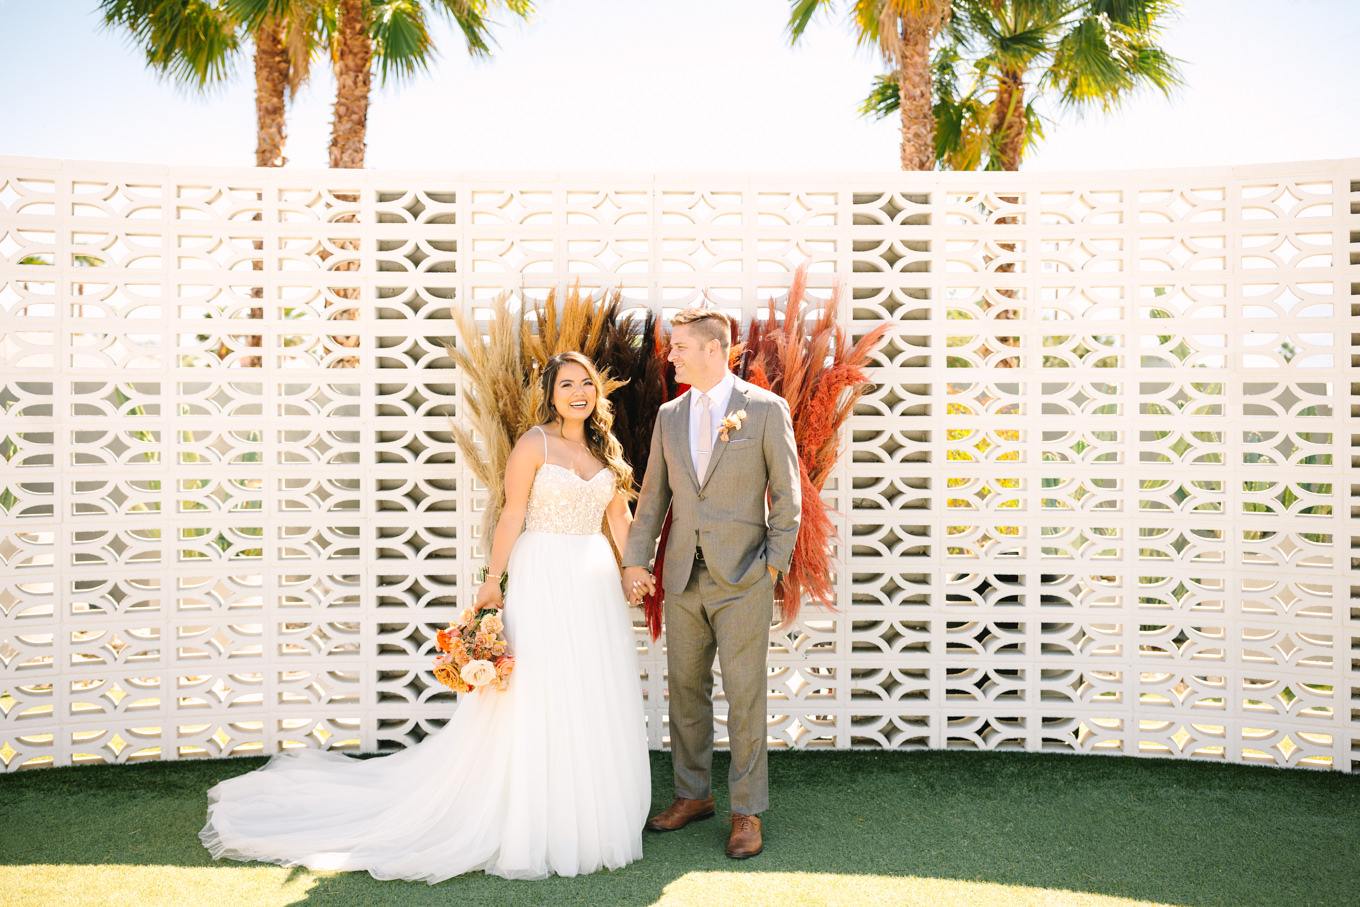 Bride and groom in front of breeze block wall | Pink and orange Lautner Compound wedding | Colorful Palm Springs wedding photography | #palmspringsphotographer #palmspringswedding #lautnercompound #southerncaliforniawedding  Source: Mary Costa Photography | Los Angeles